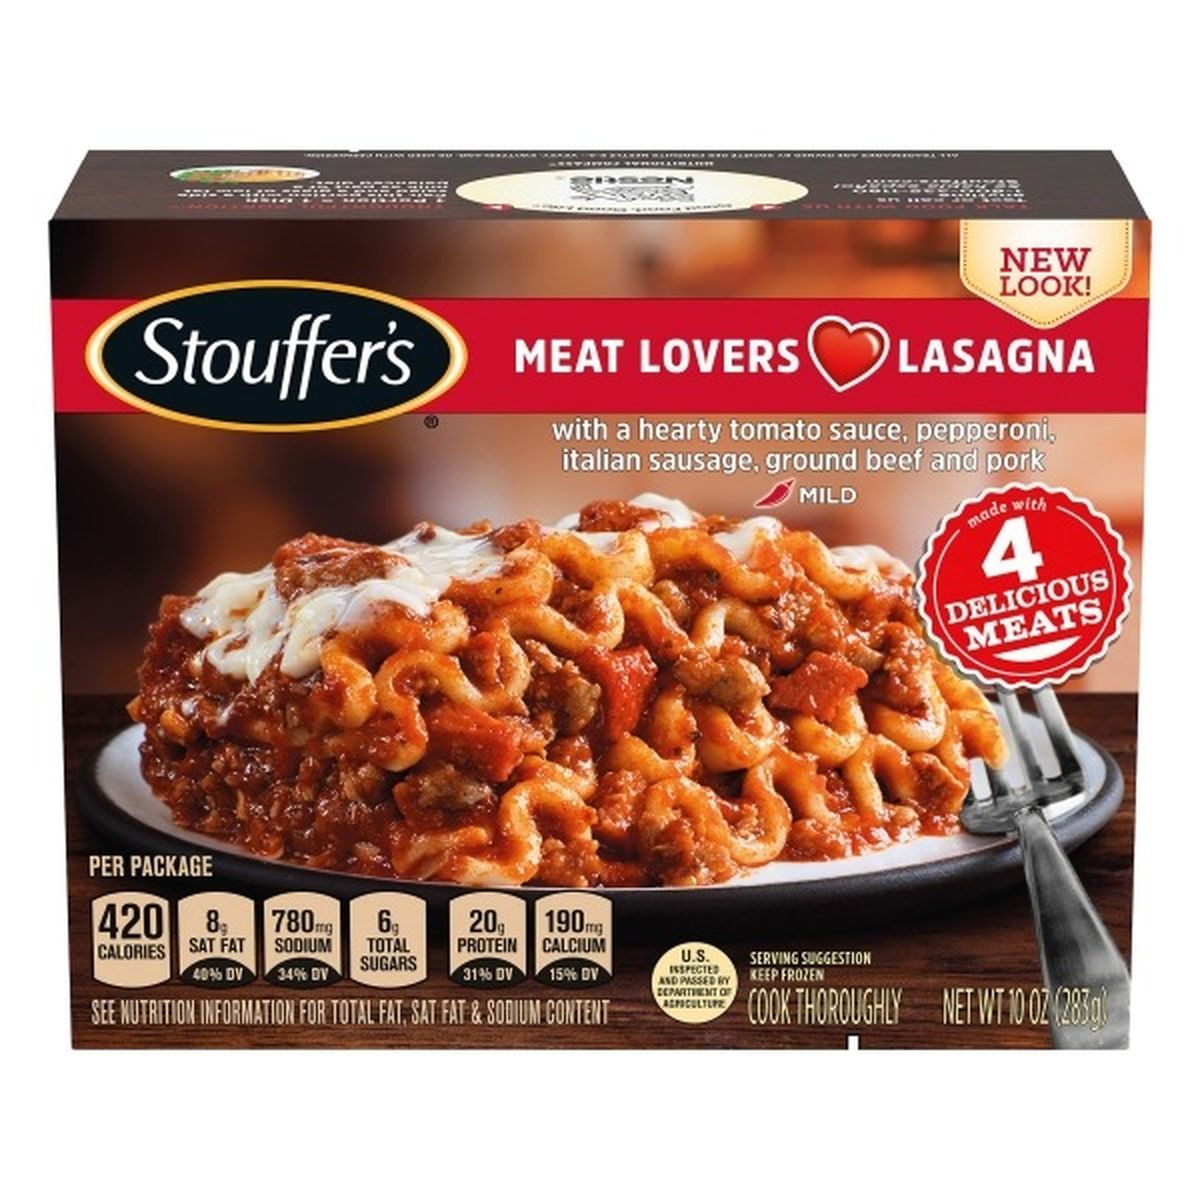 Calories in Stouffer's Meat Lovers Lasagna, Mild